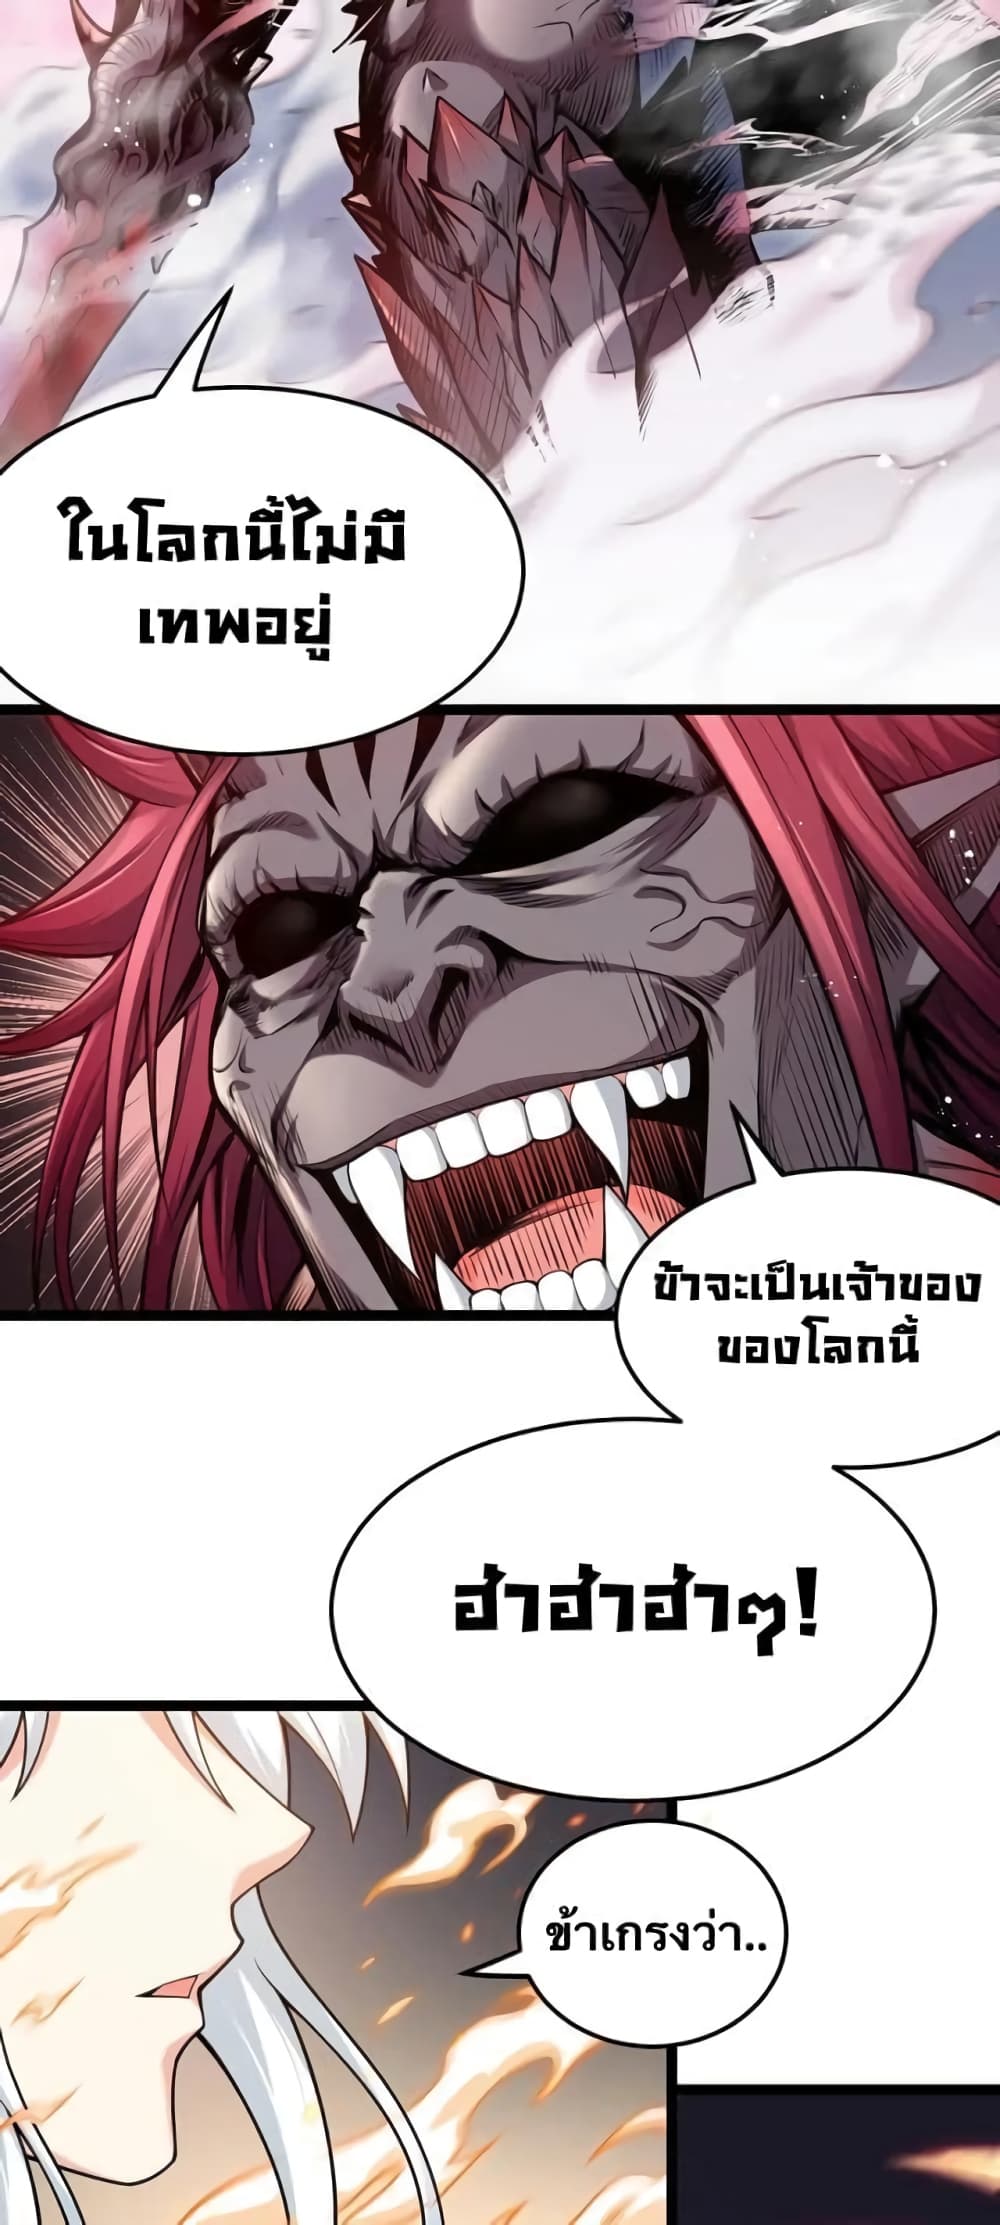 Godsian Masian from Another World ตอนที่ 90 (4)